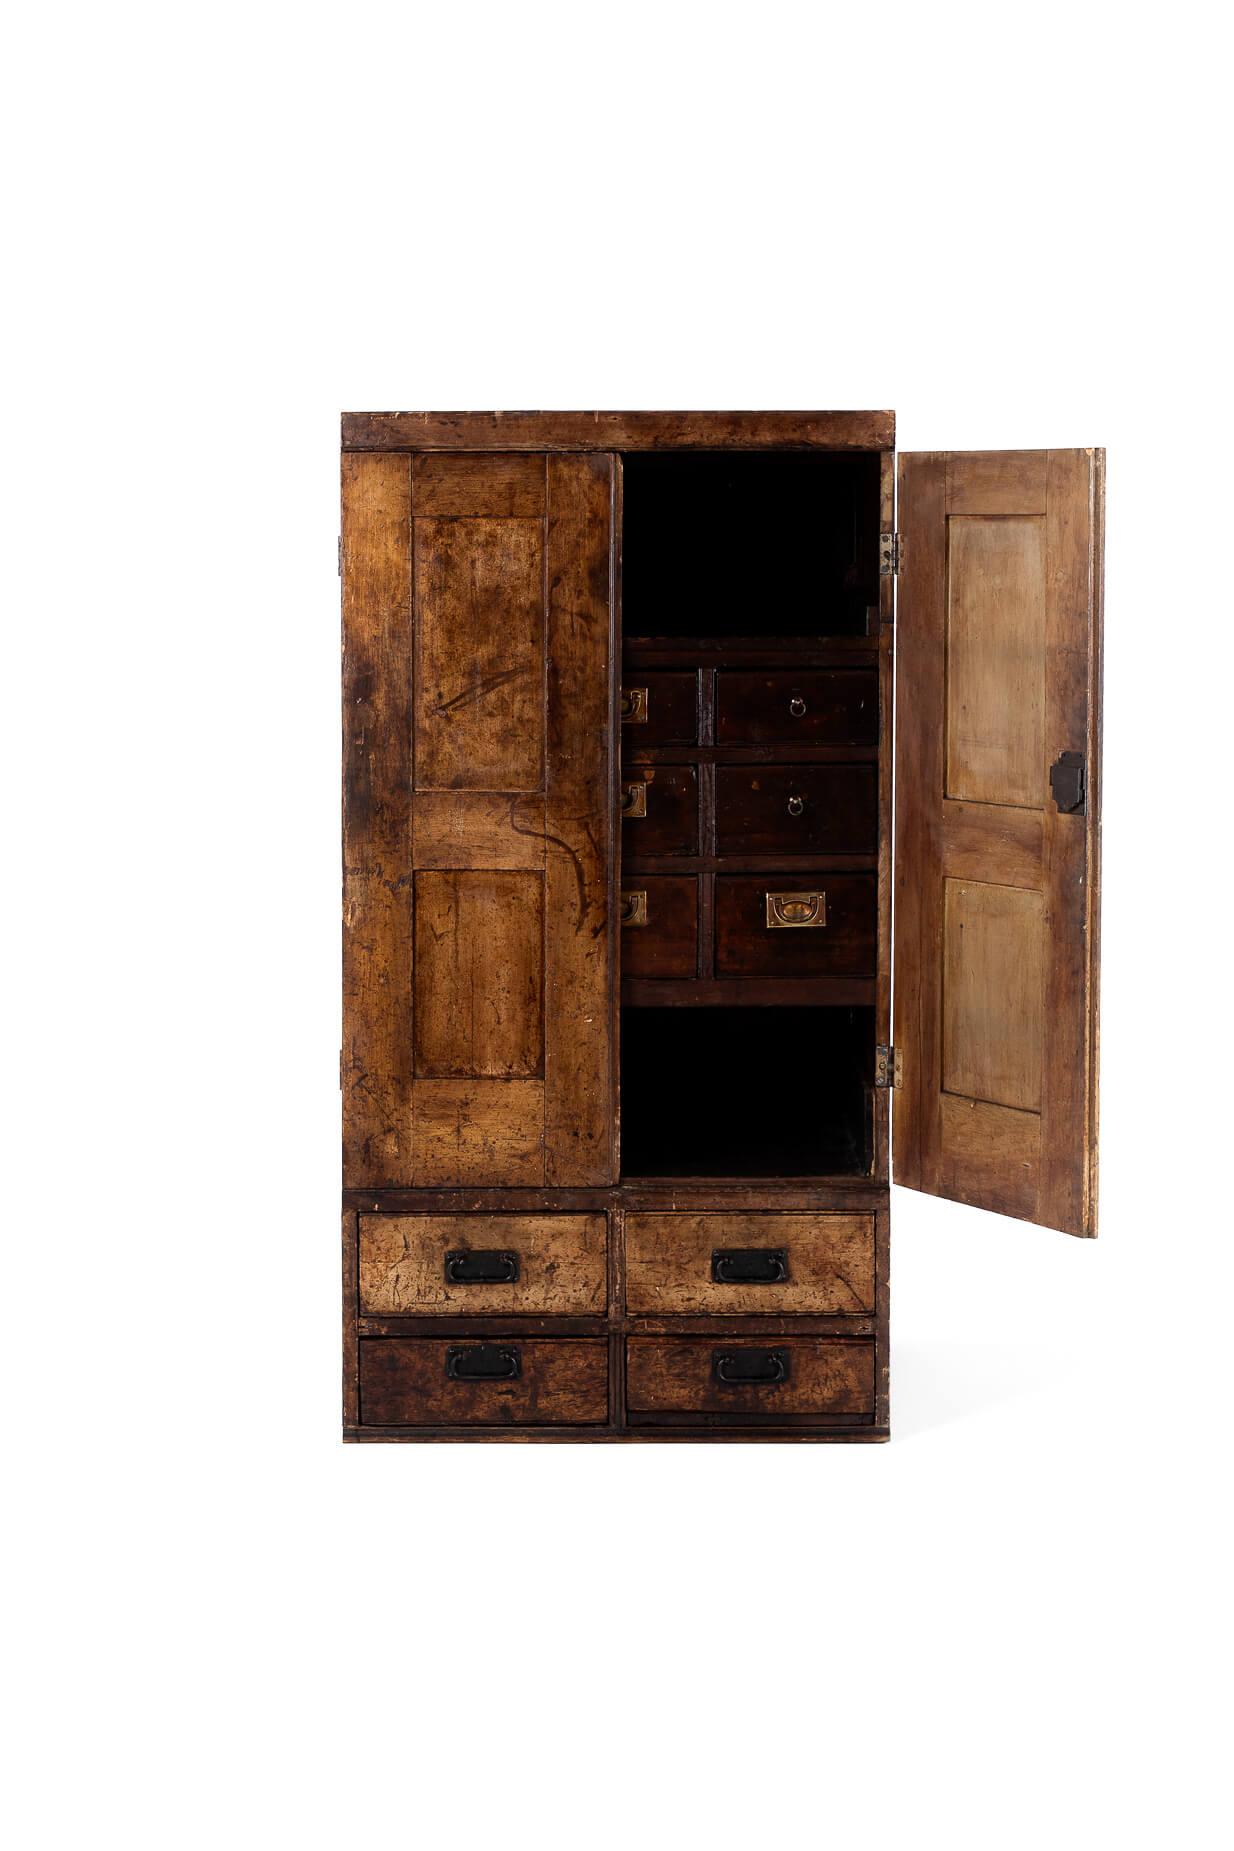 British Victorian Watchmakers Cupboard For Sale